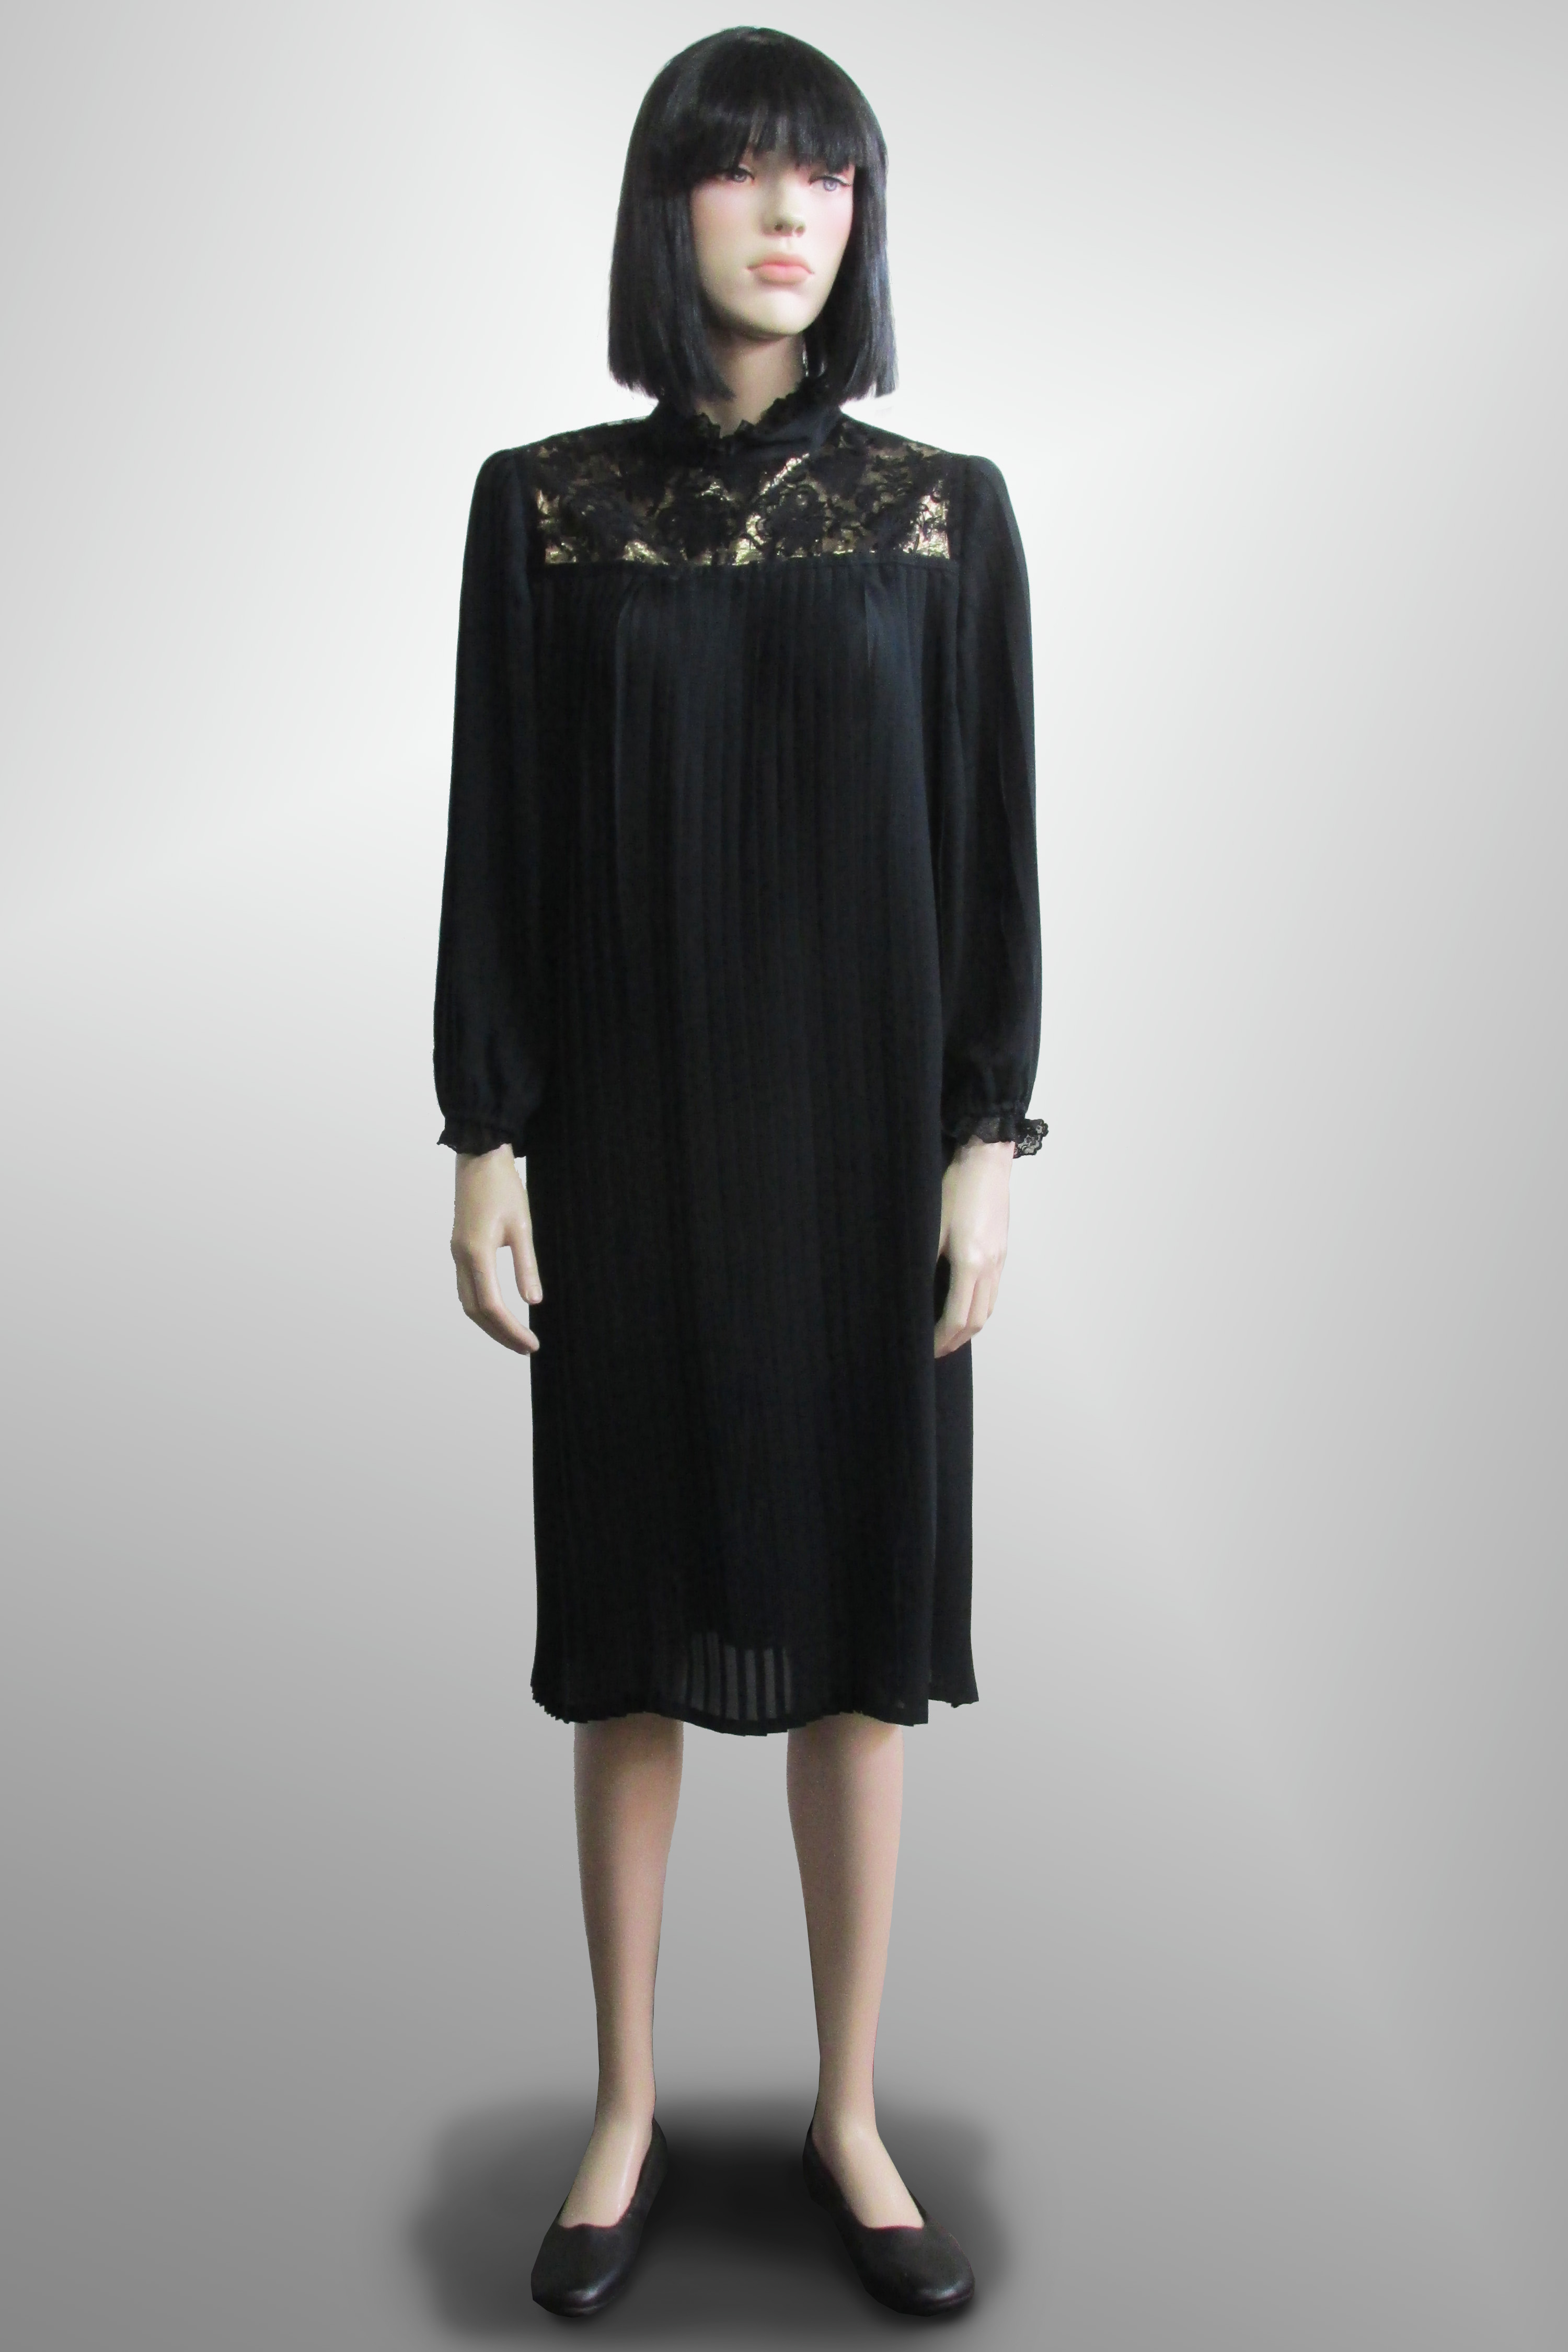 Dress Black Chiffon Pleated with Gold Detail